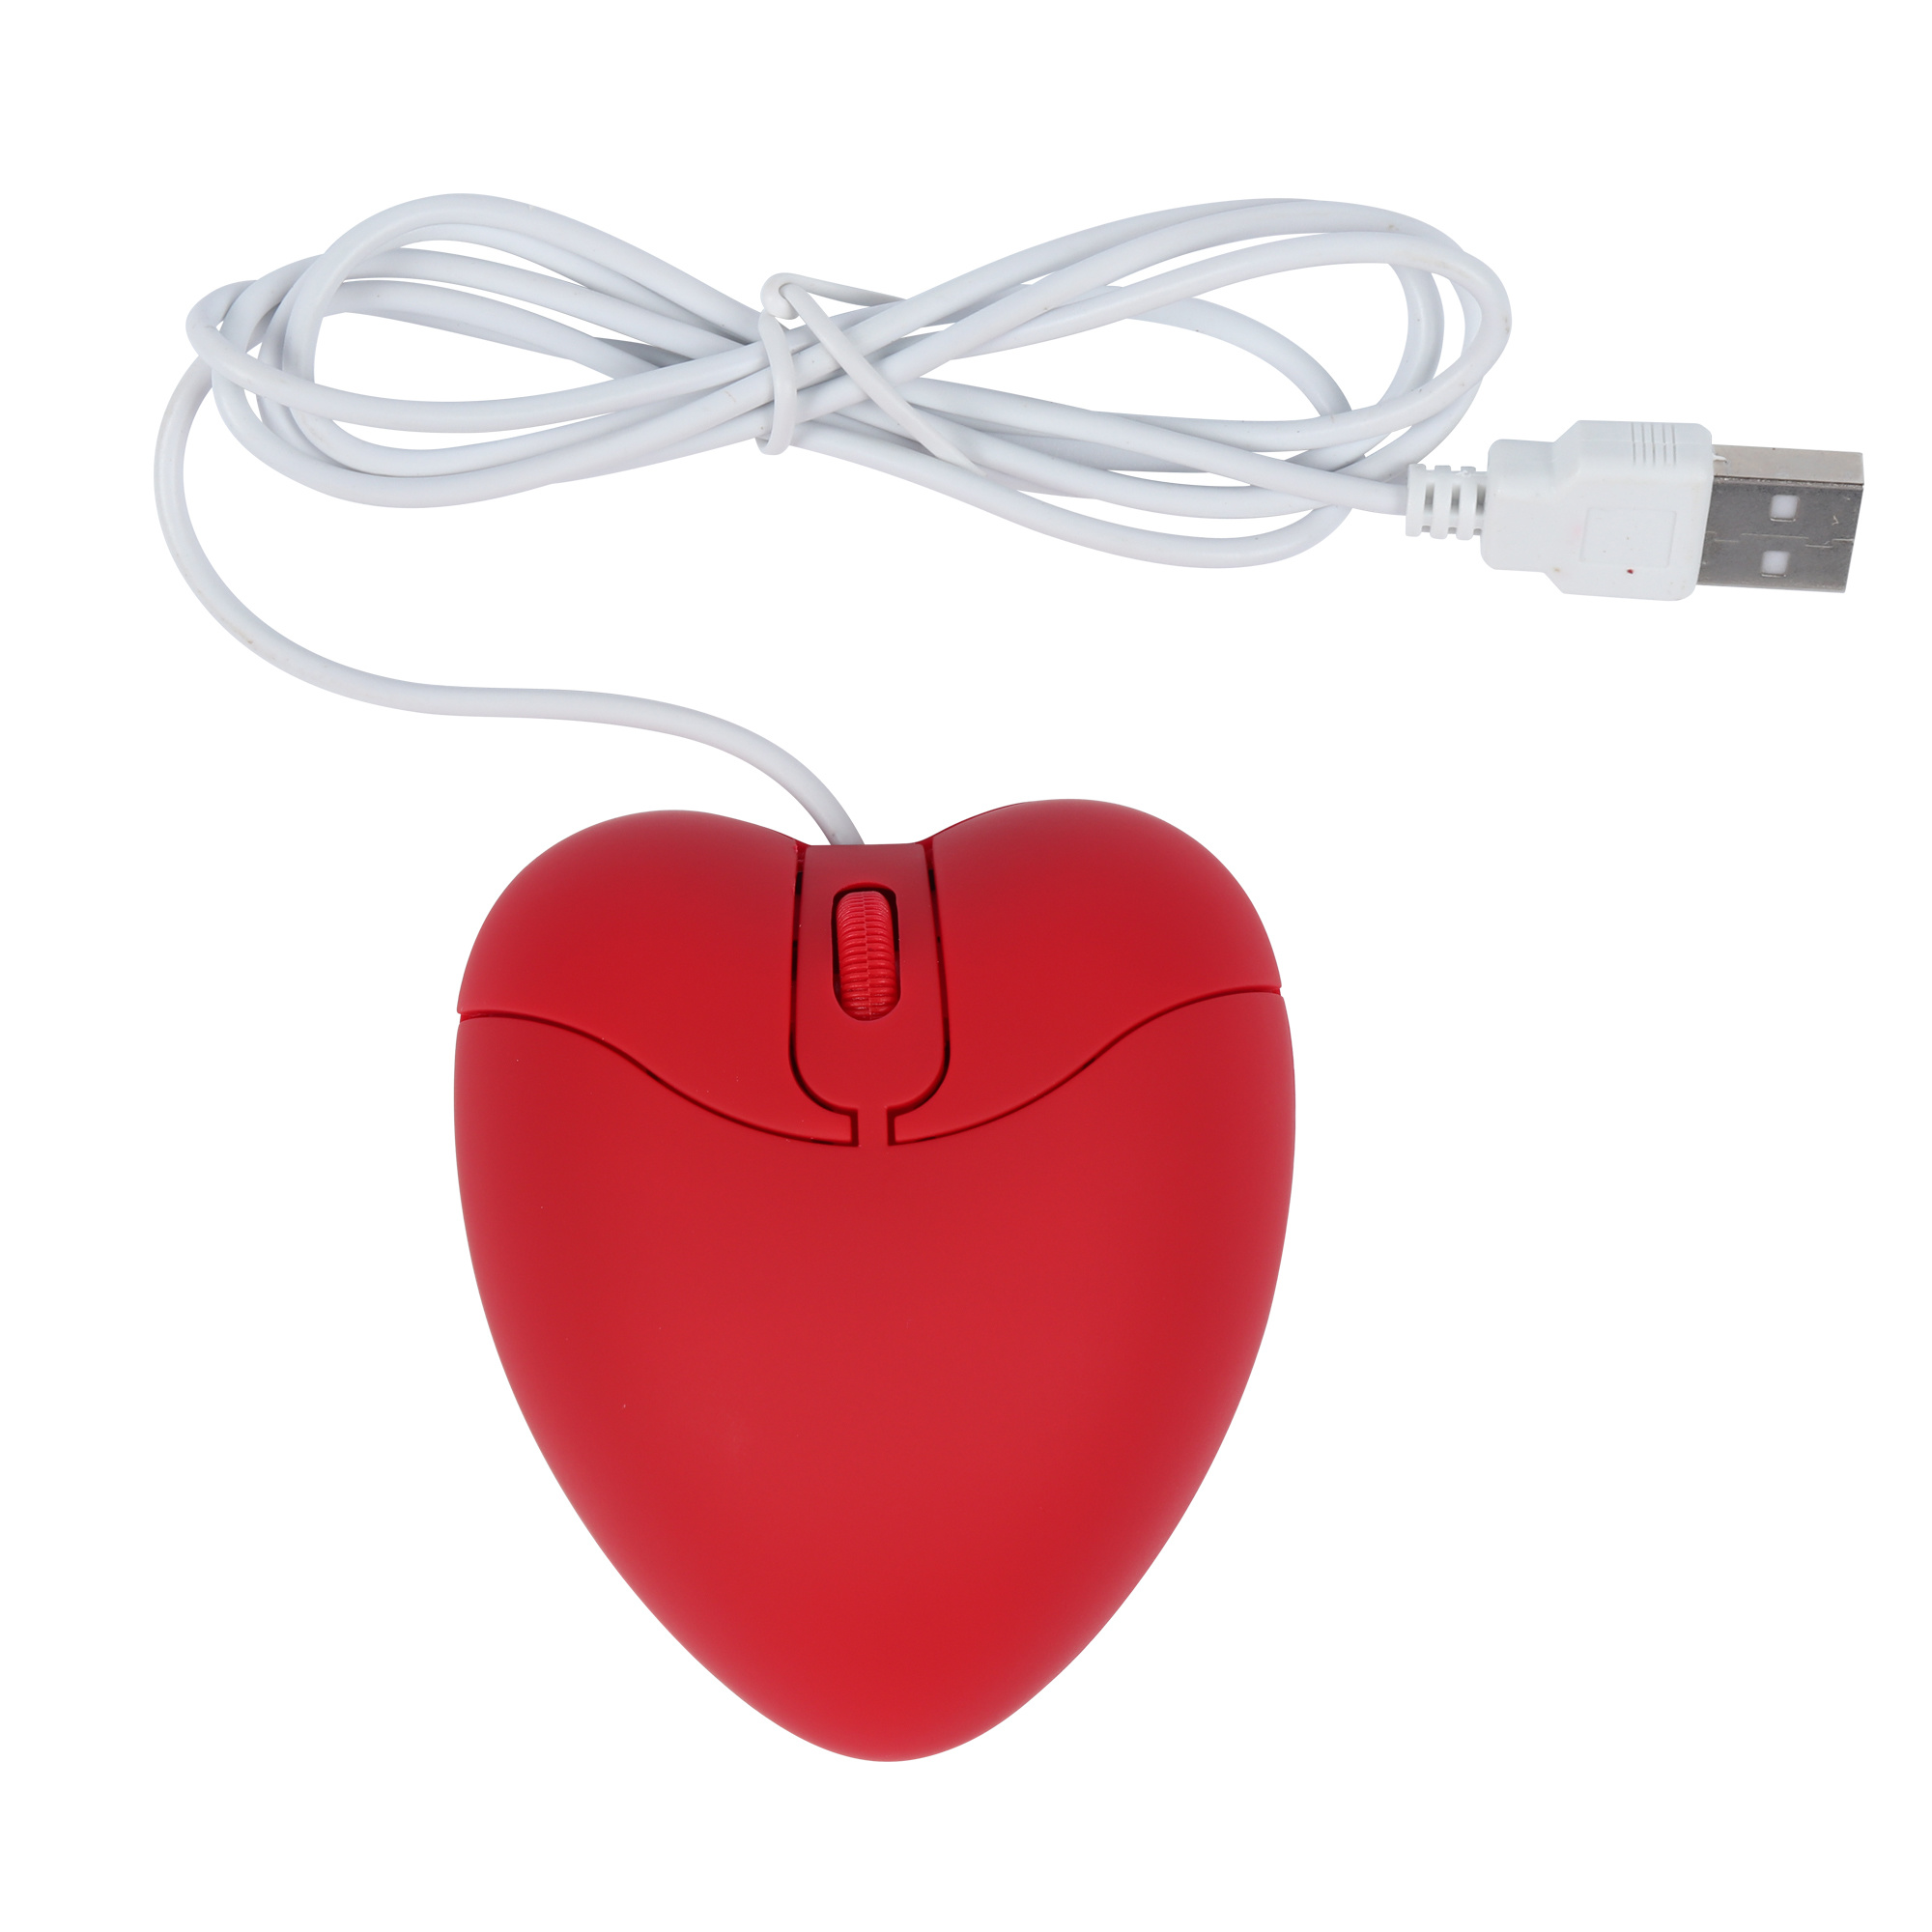 Computer-Wired-Mouse-USB-Optical-Creative-Gaming-Cute-Mause-Ergonomic-Love-Heart-3D-Mice-For-Laptop (2)